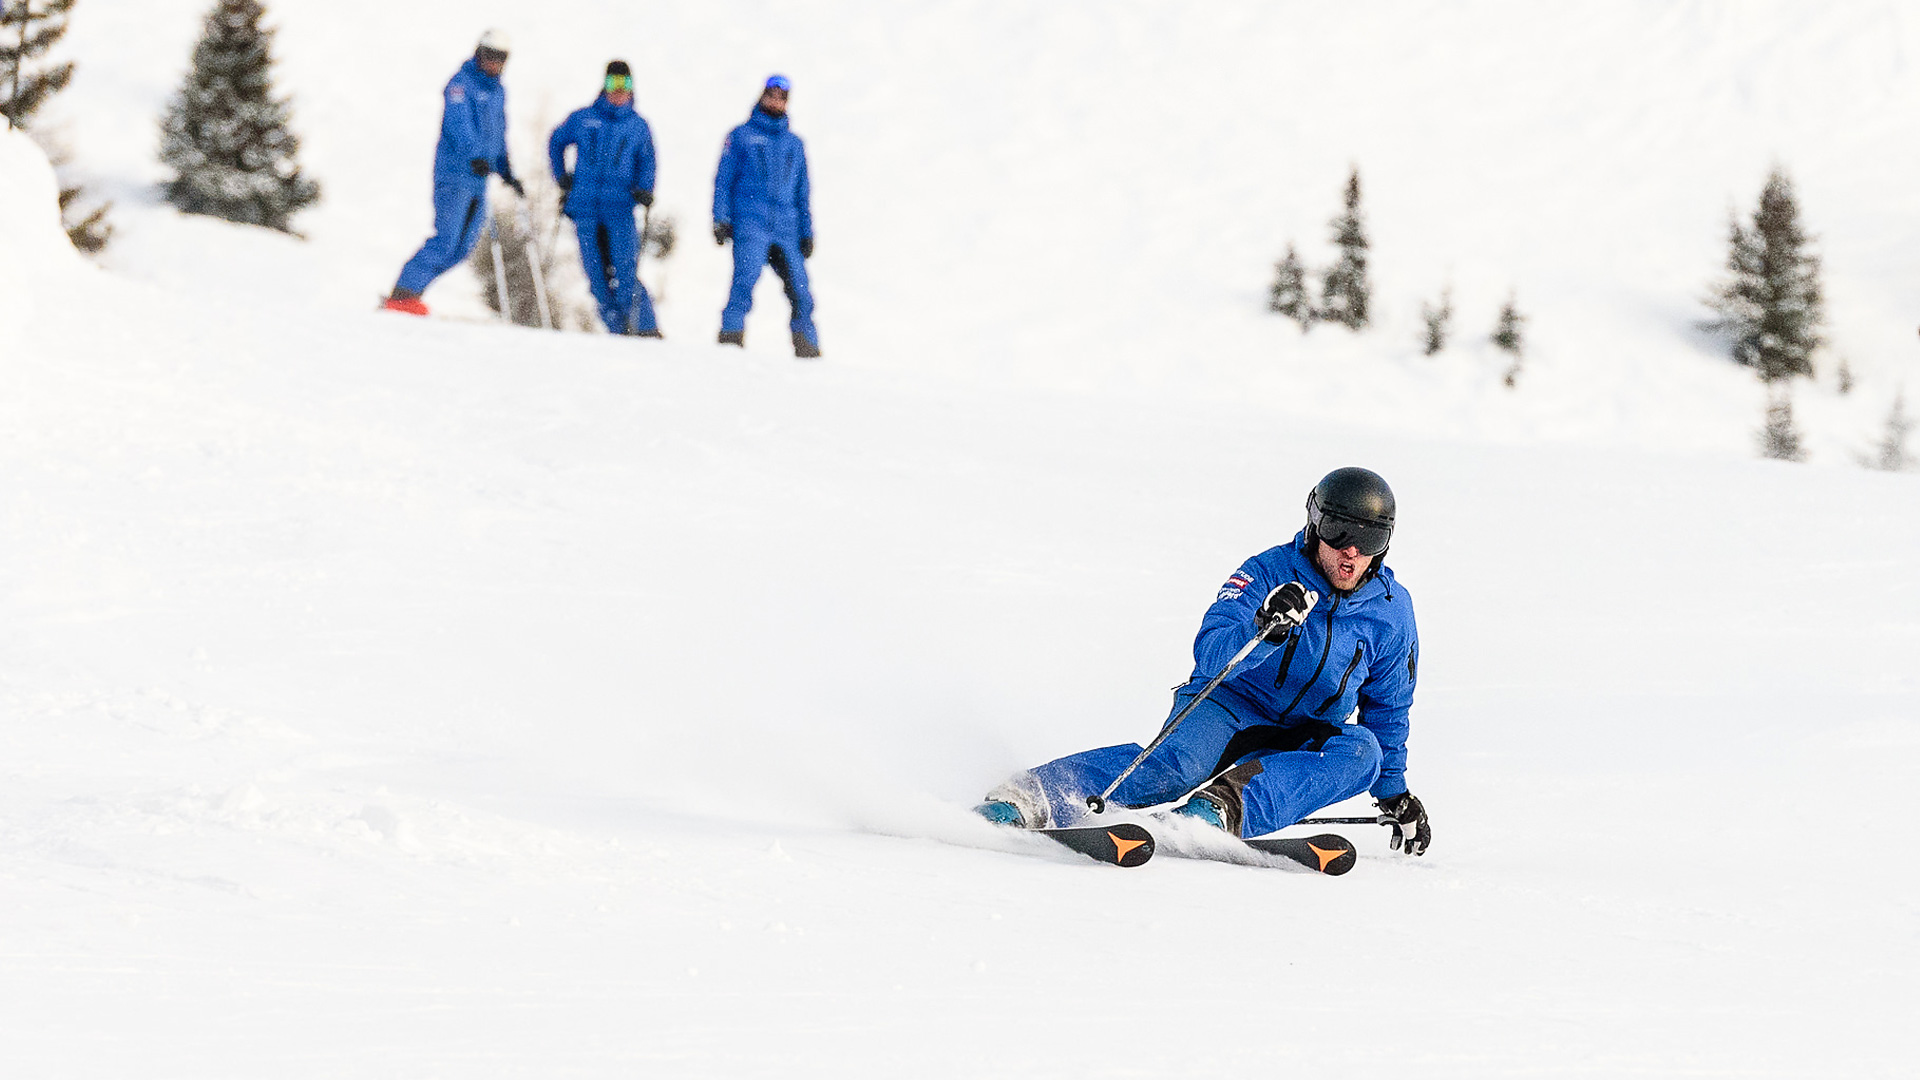 How to choose your Ski Instructor Course